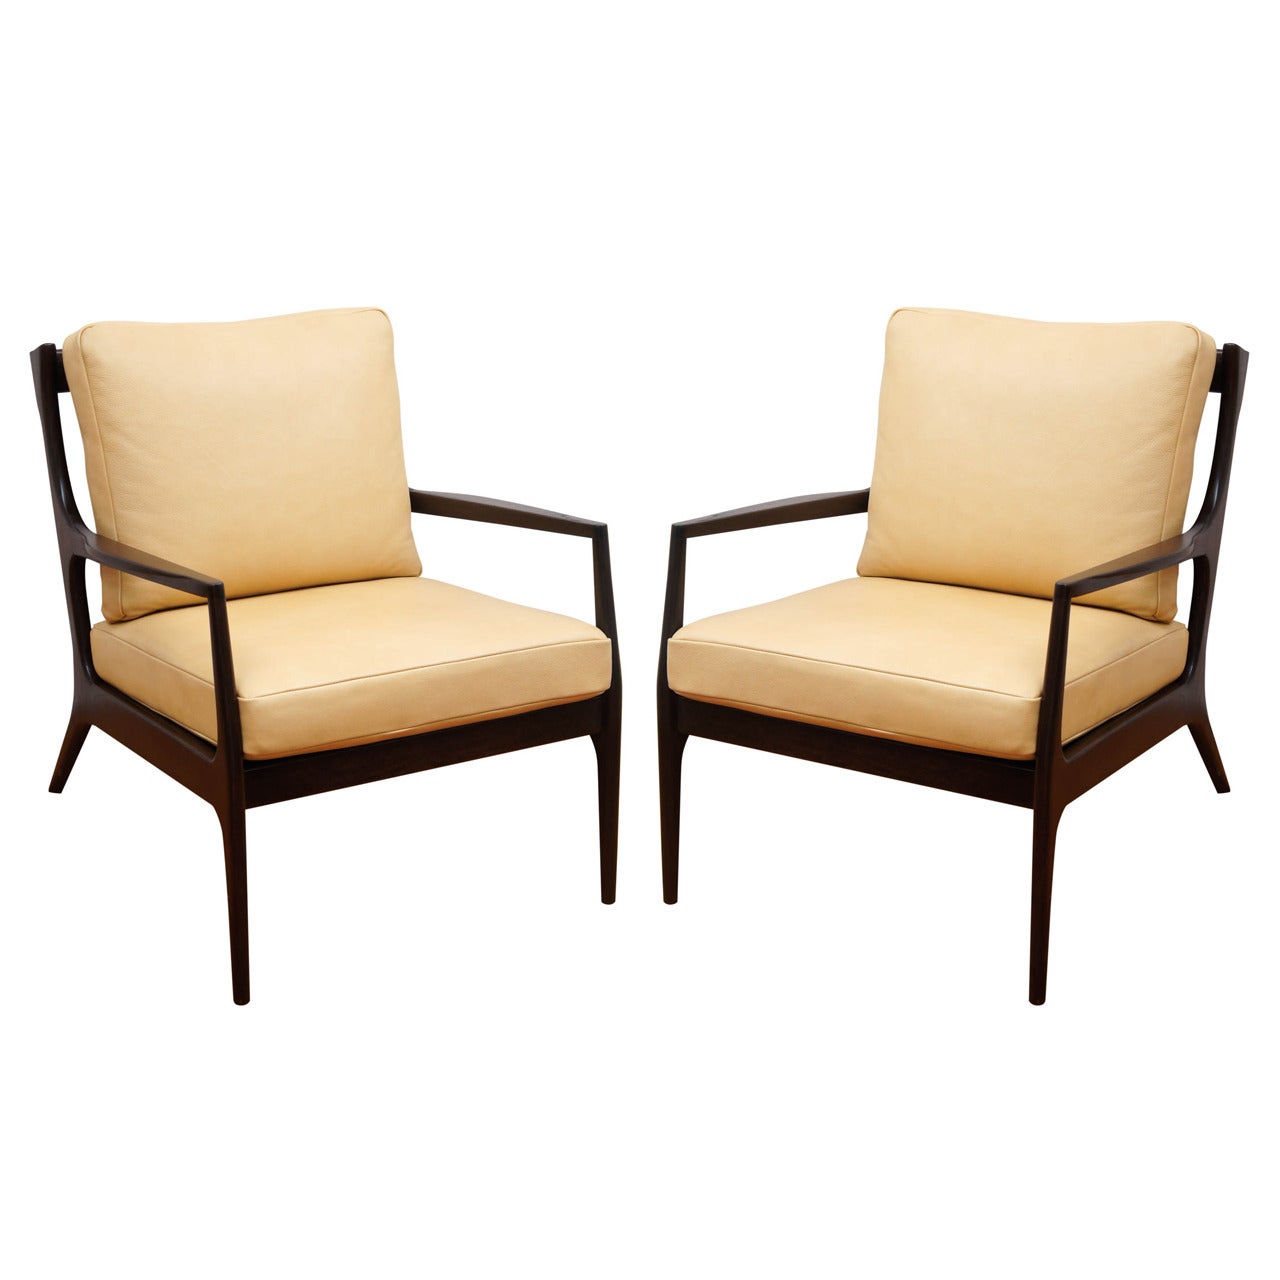 a pair of Danish style Mid Century armchairs